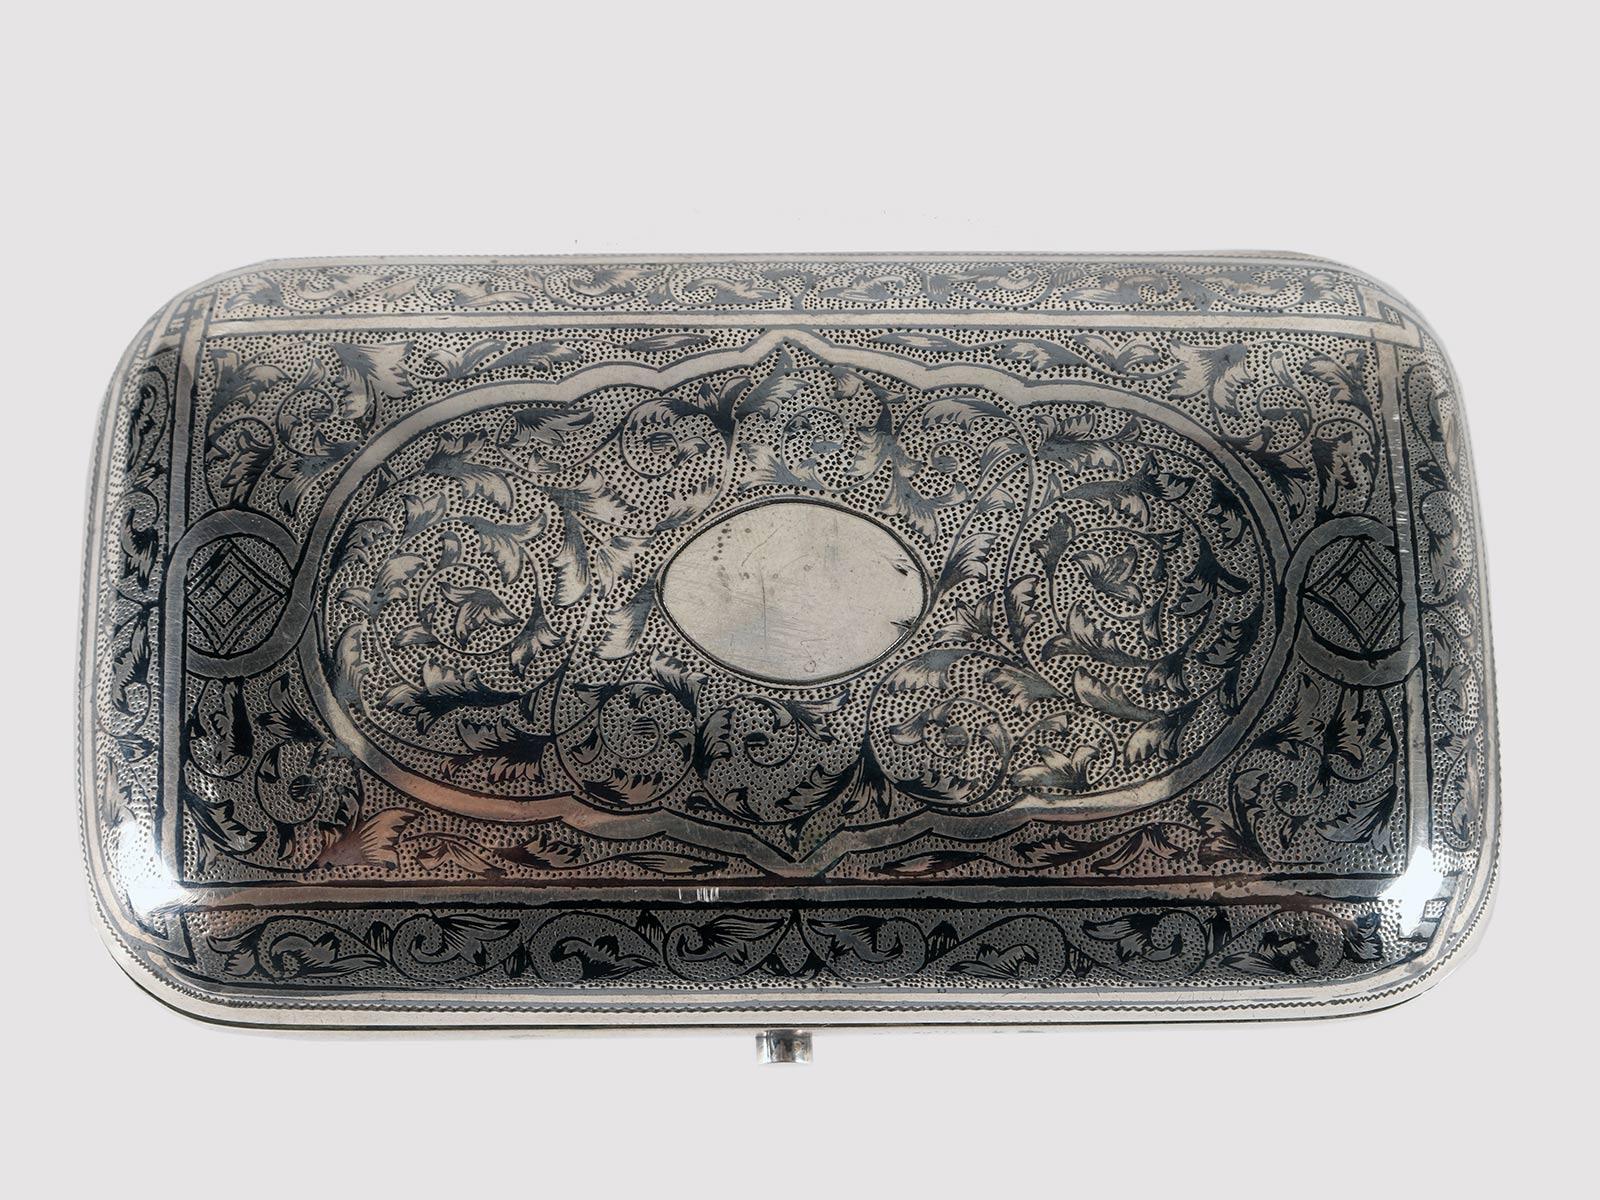 Silver and niello snuffbox. The tobacco box, made of 84 zolotnik silver (875/1000) is rectangular in shape with a soap bar body, with rounded corners and rounded profiles. The entire decoration of the box is made with niello.
The upper part is